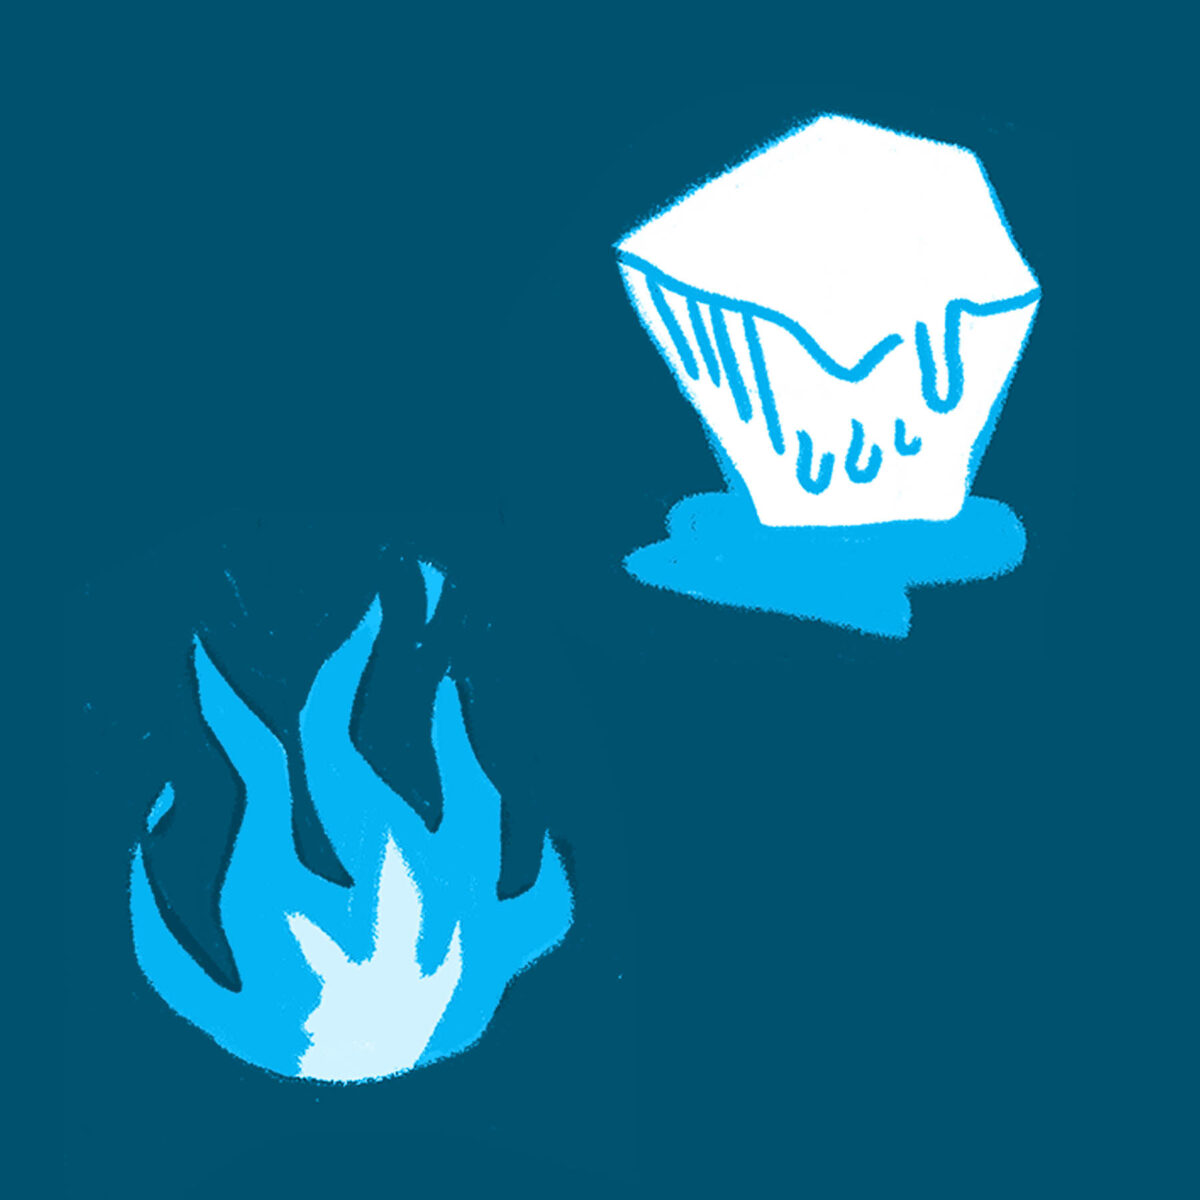 An illustration of a fire and a melting glacier, in shades of blue.